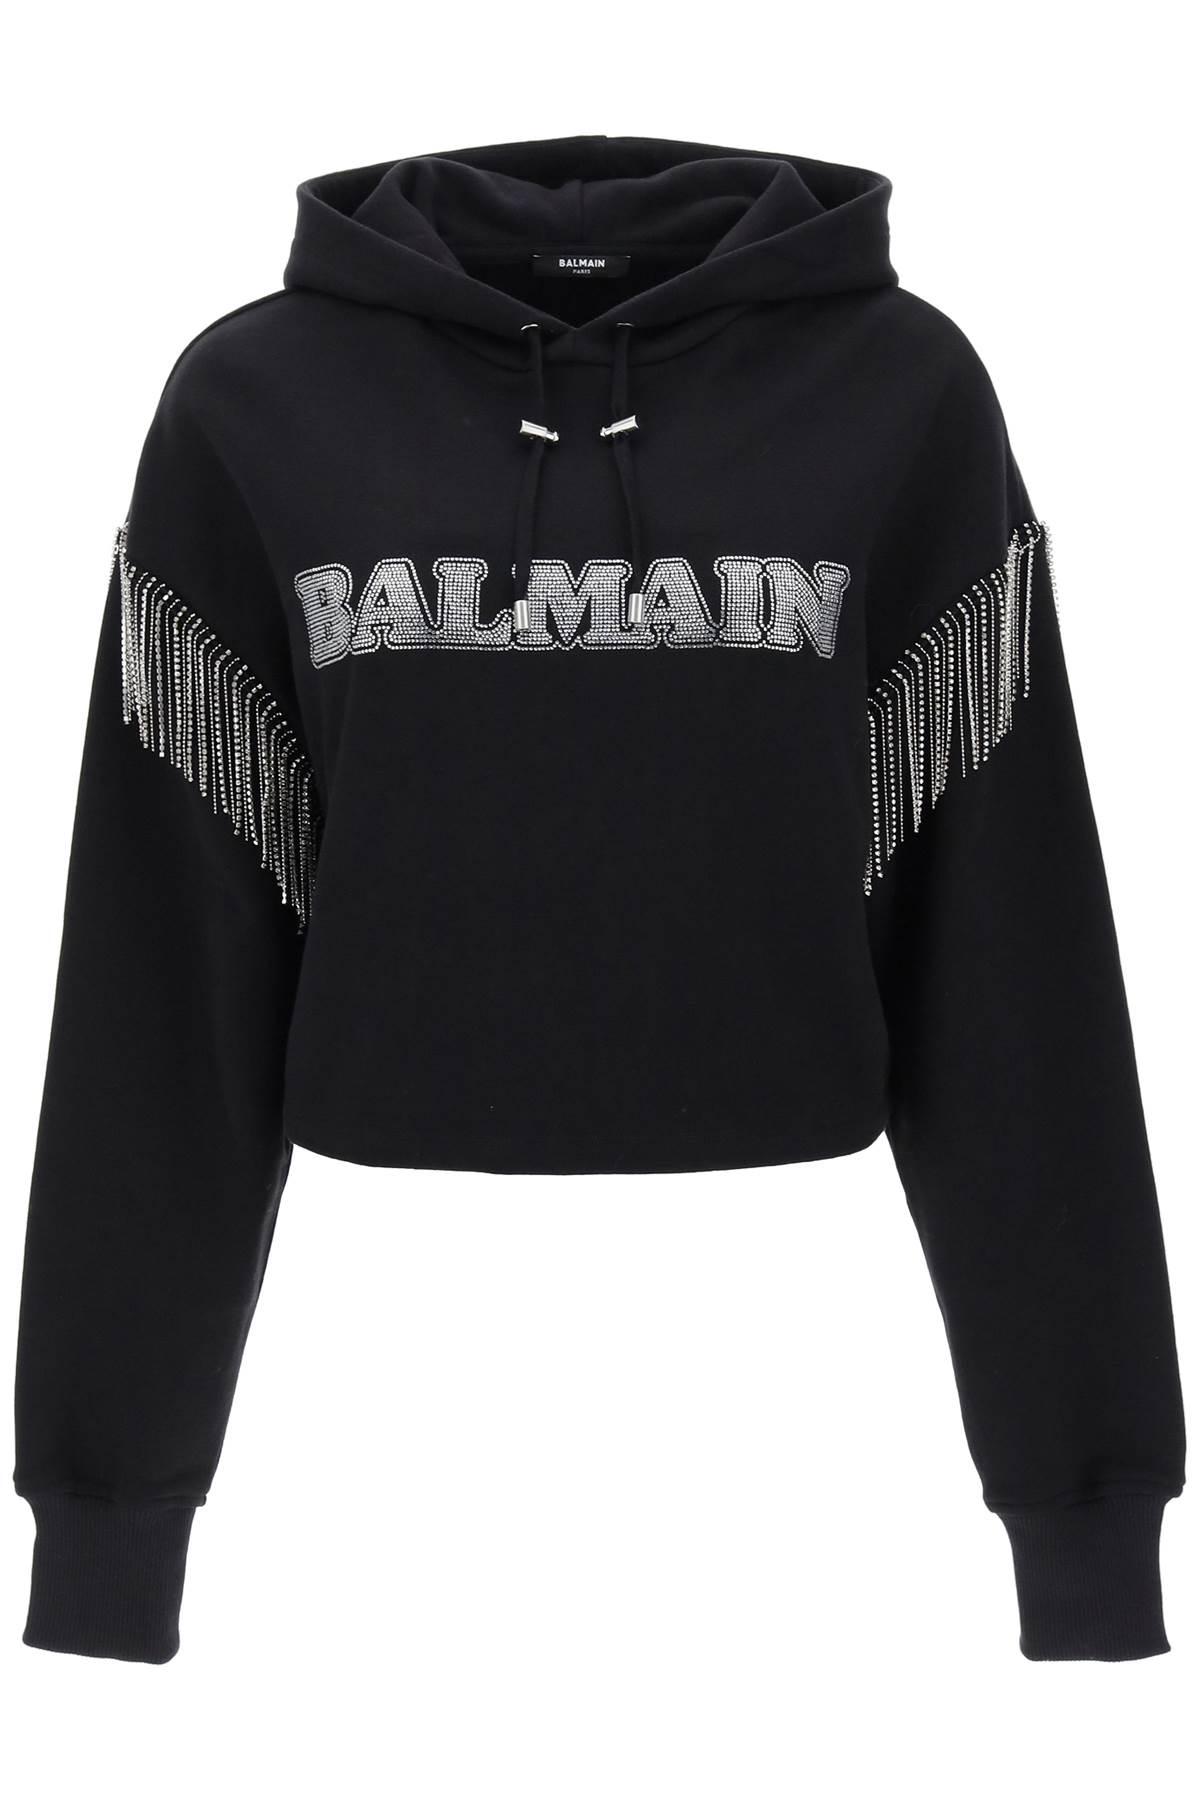 Balmain Cropped Hoodie With Rhinestone Studded Logo And Crystal Cupchains